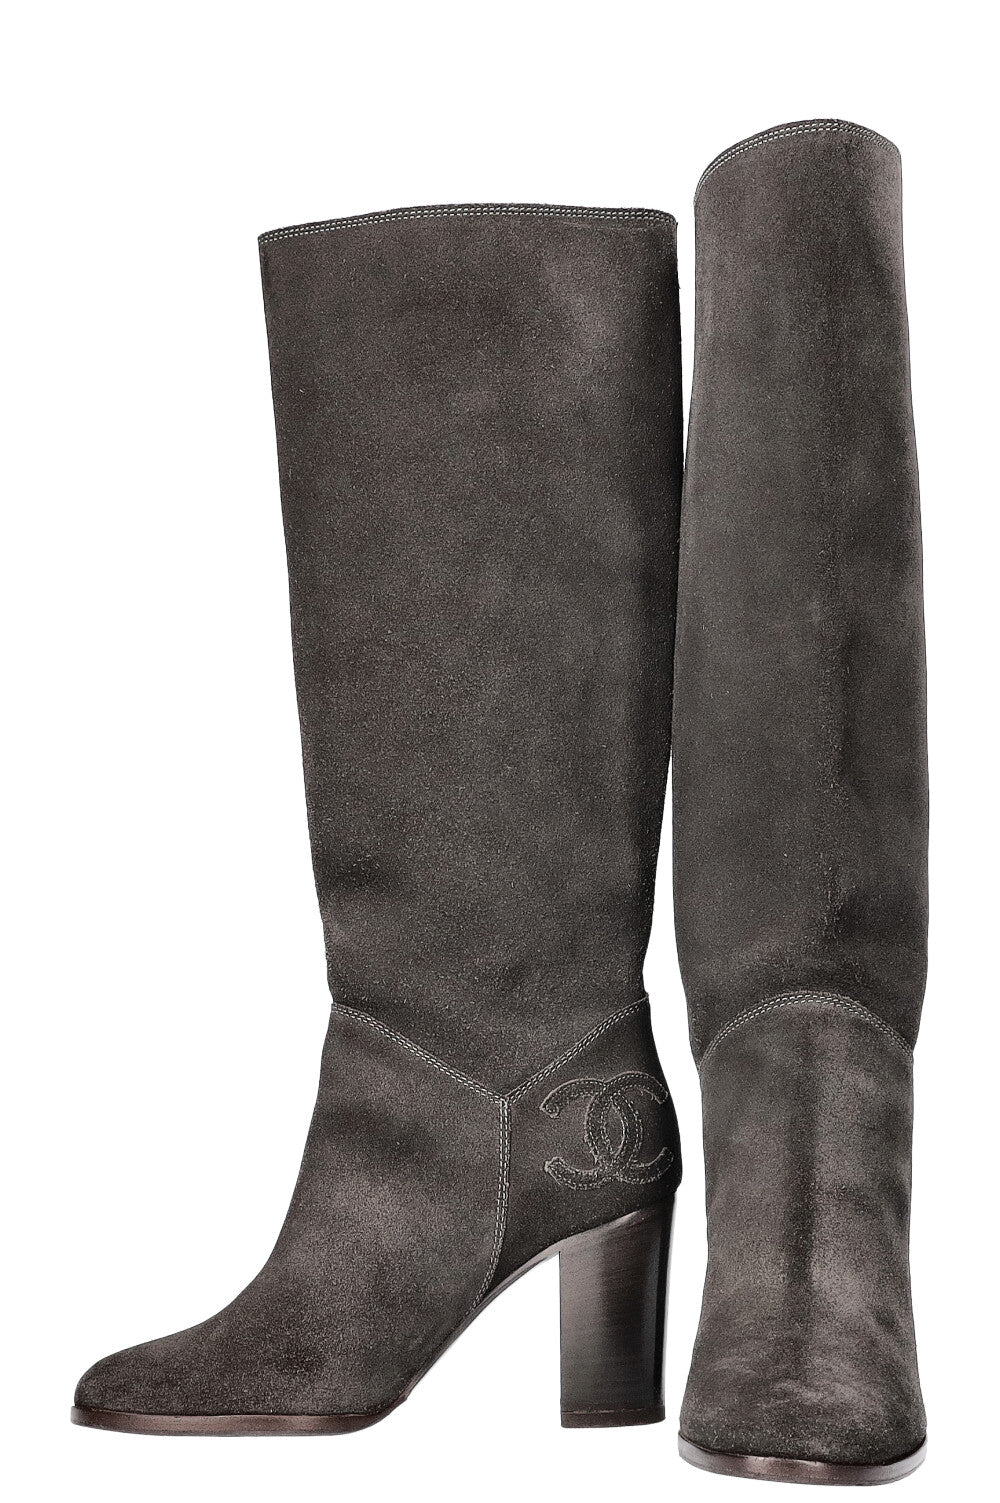 CHANEL Boots Suede Grey